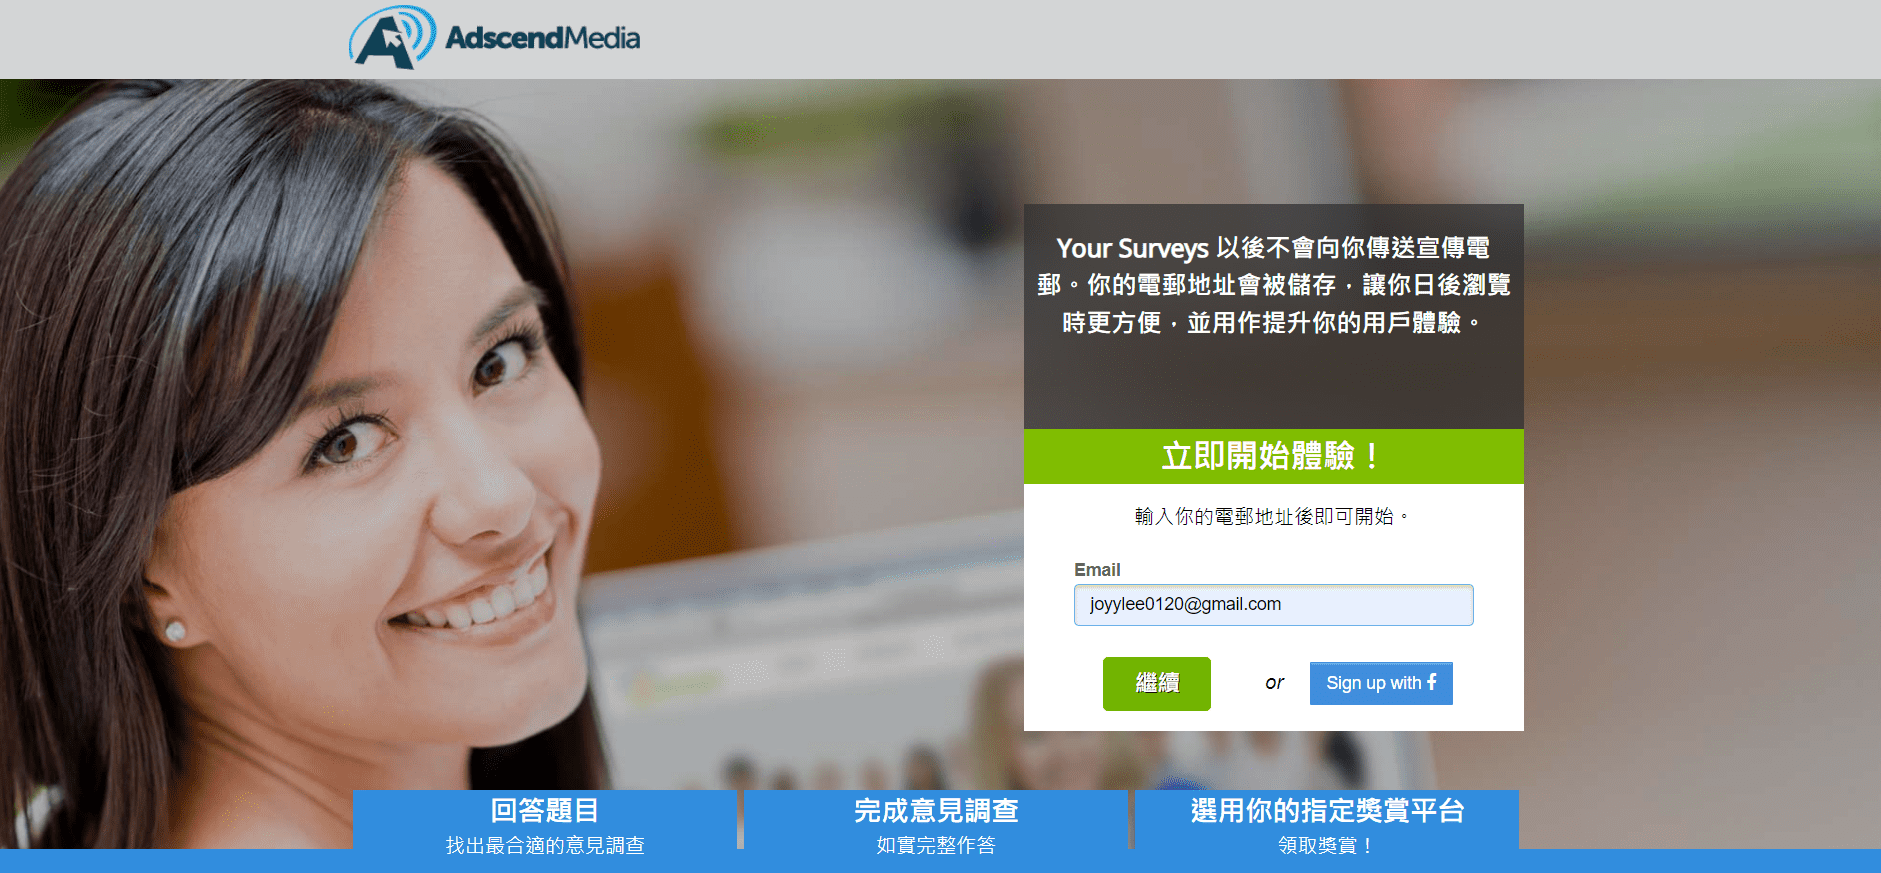 Paypal賺錢 Lootup